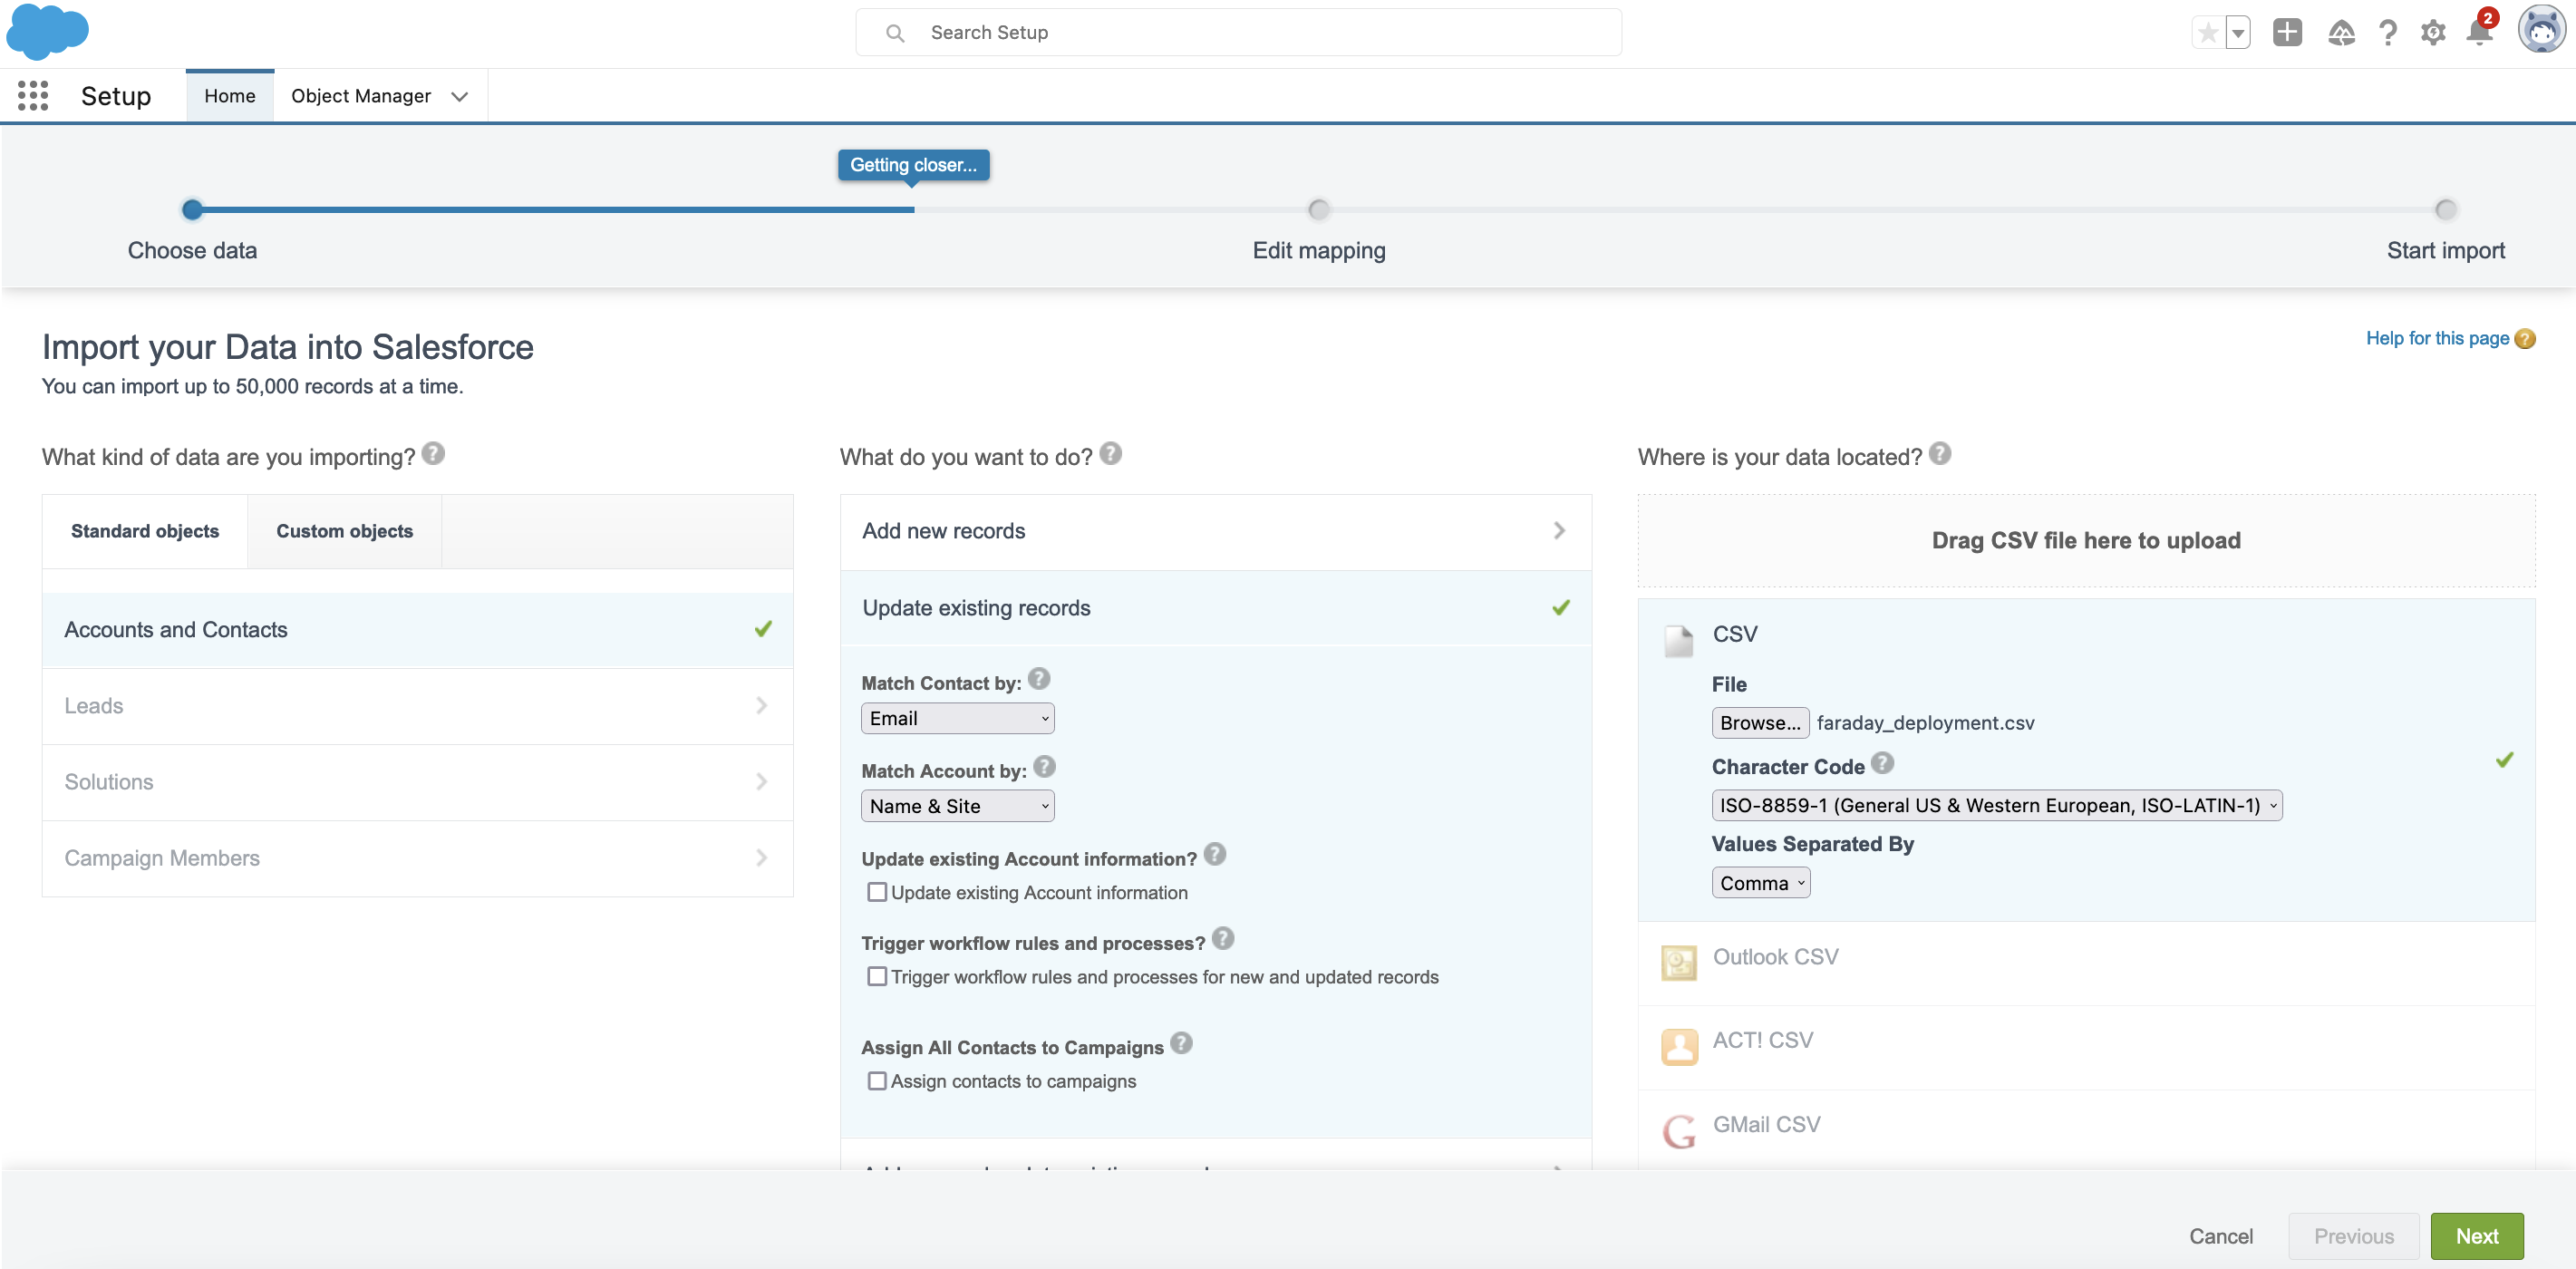 Image of Salesforce update existing records selection